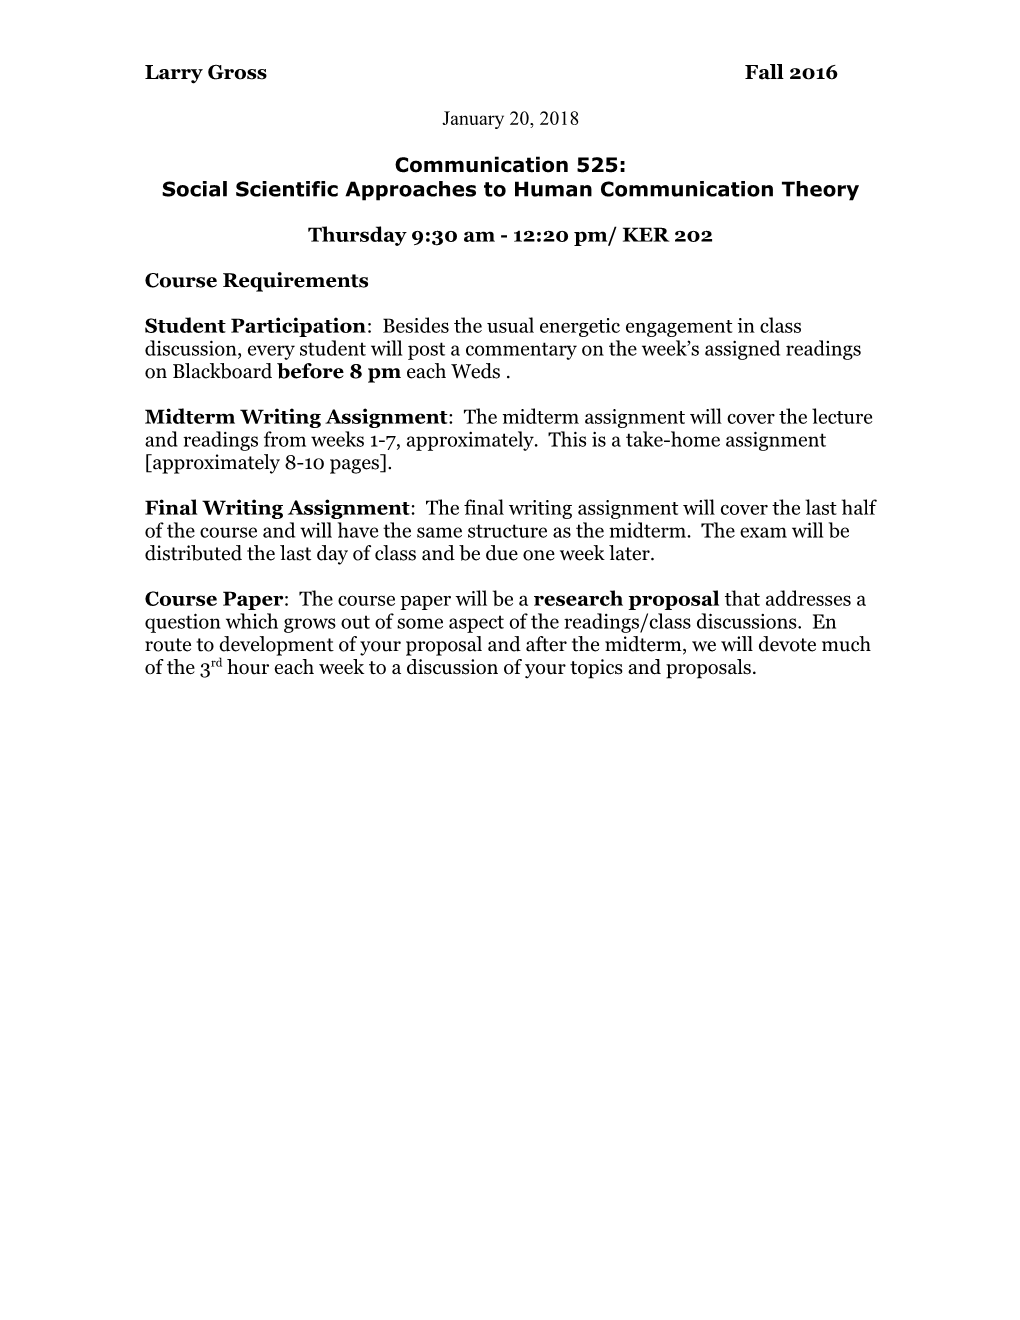 Social Scientific Approaches to Human Communication Theory